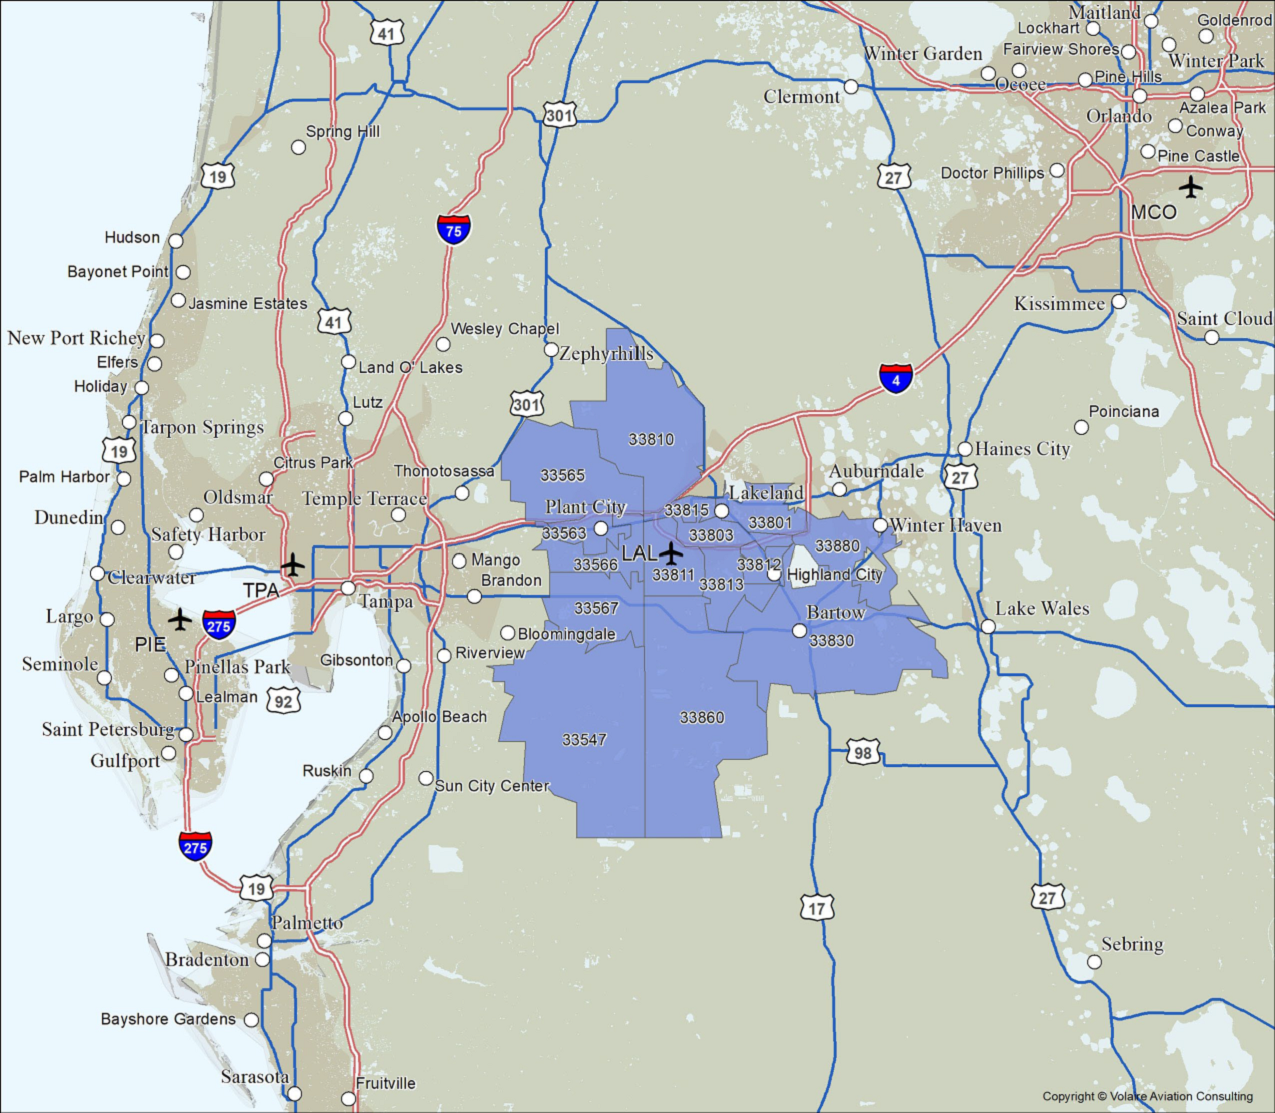 This is a map of the central Florida region with 15 counties outlined which make up the Lakeland Airport passenger catchment area.